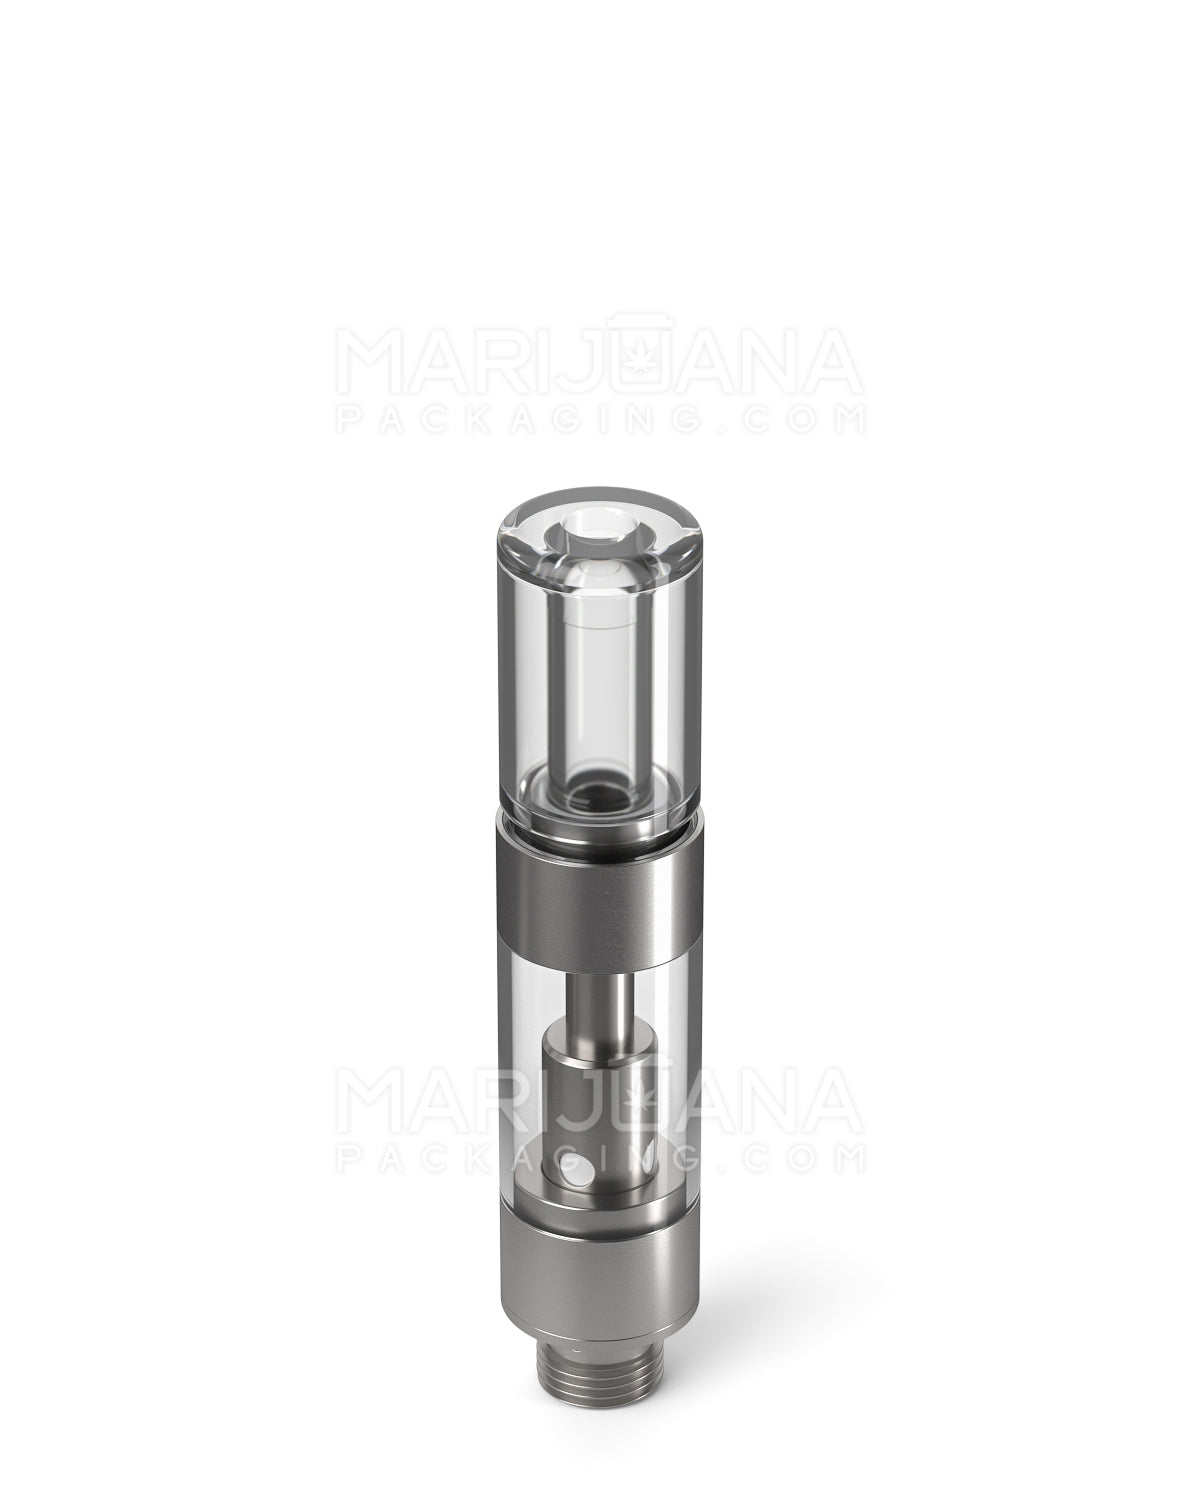 CCELL | Liquid6 Reactor Plastic Vape Cartridge with Barrel Clear Plastic Mouthpiece | 0.5mL - Press On - 100 Count - 4